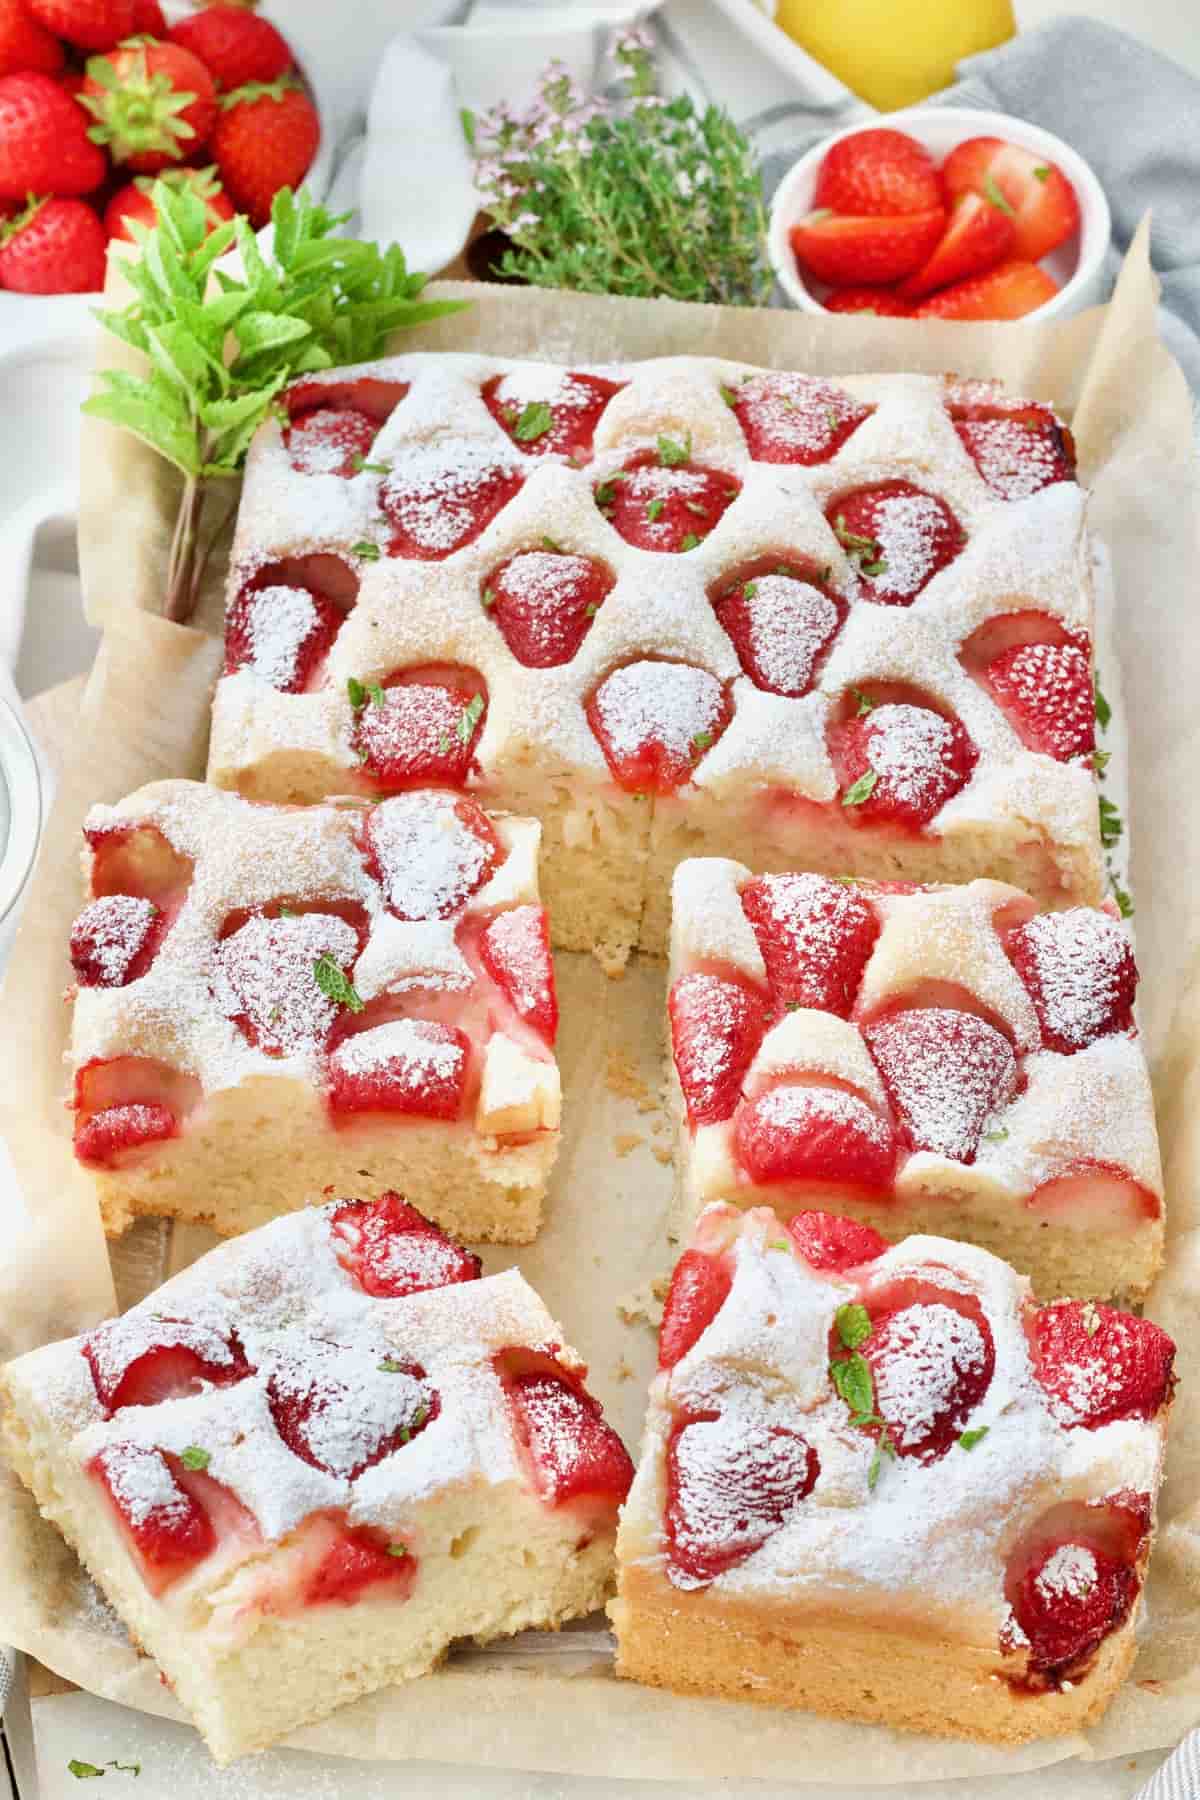 Strawberry traybake with four large portions cut.